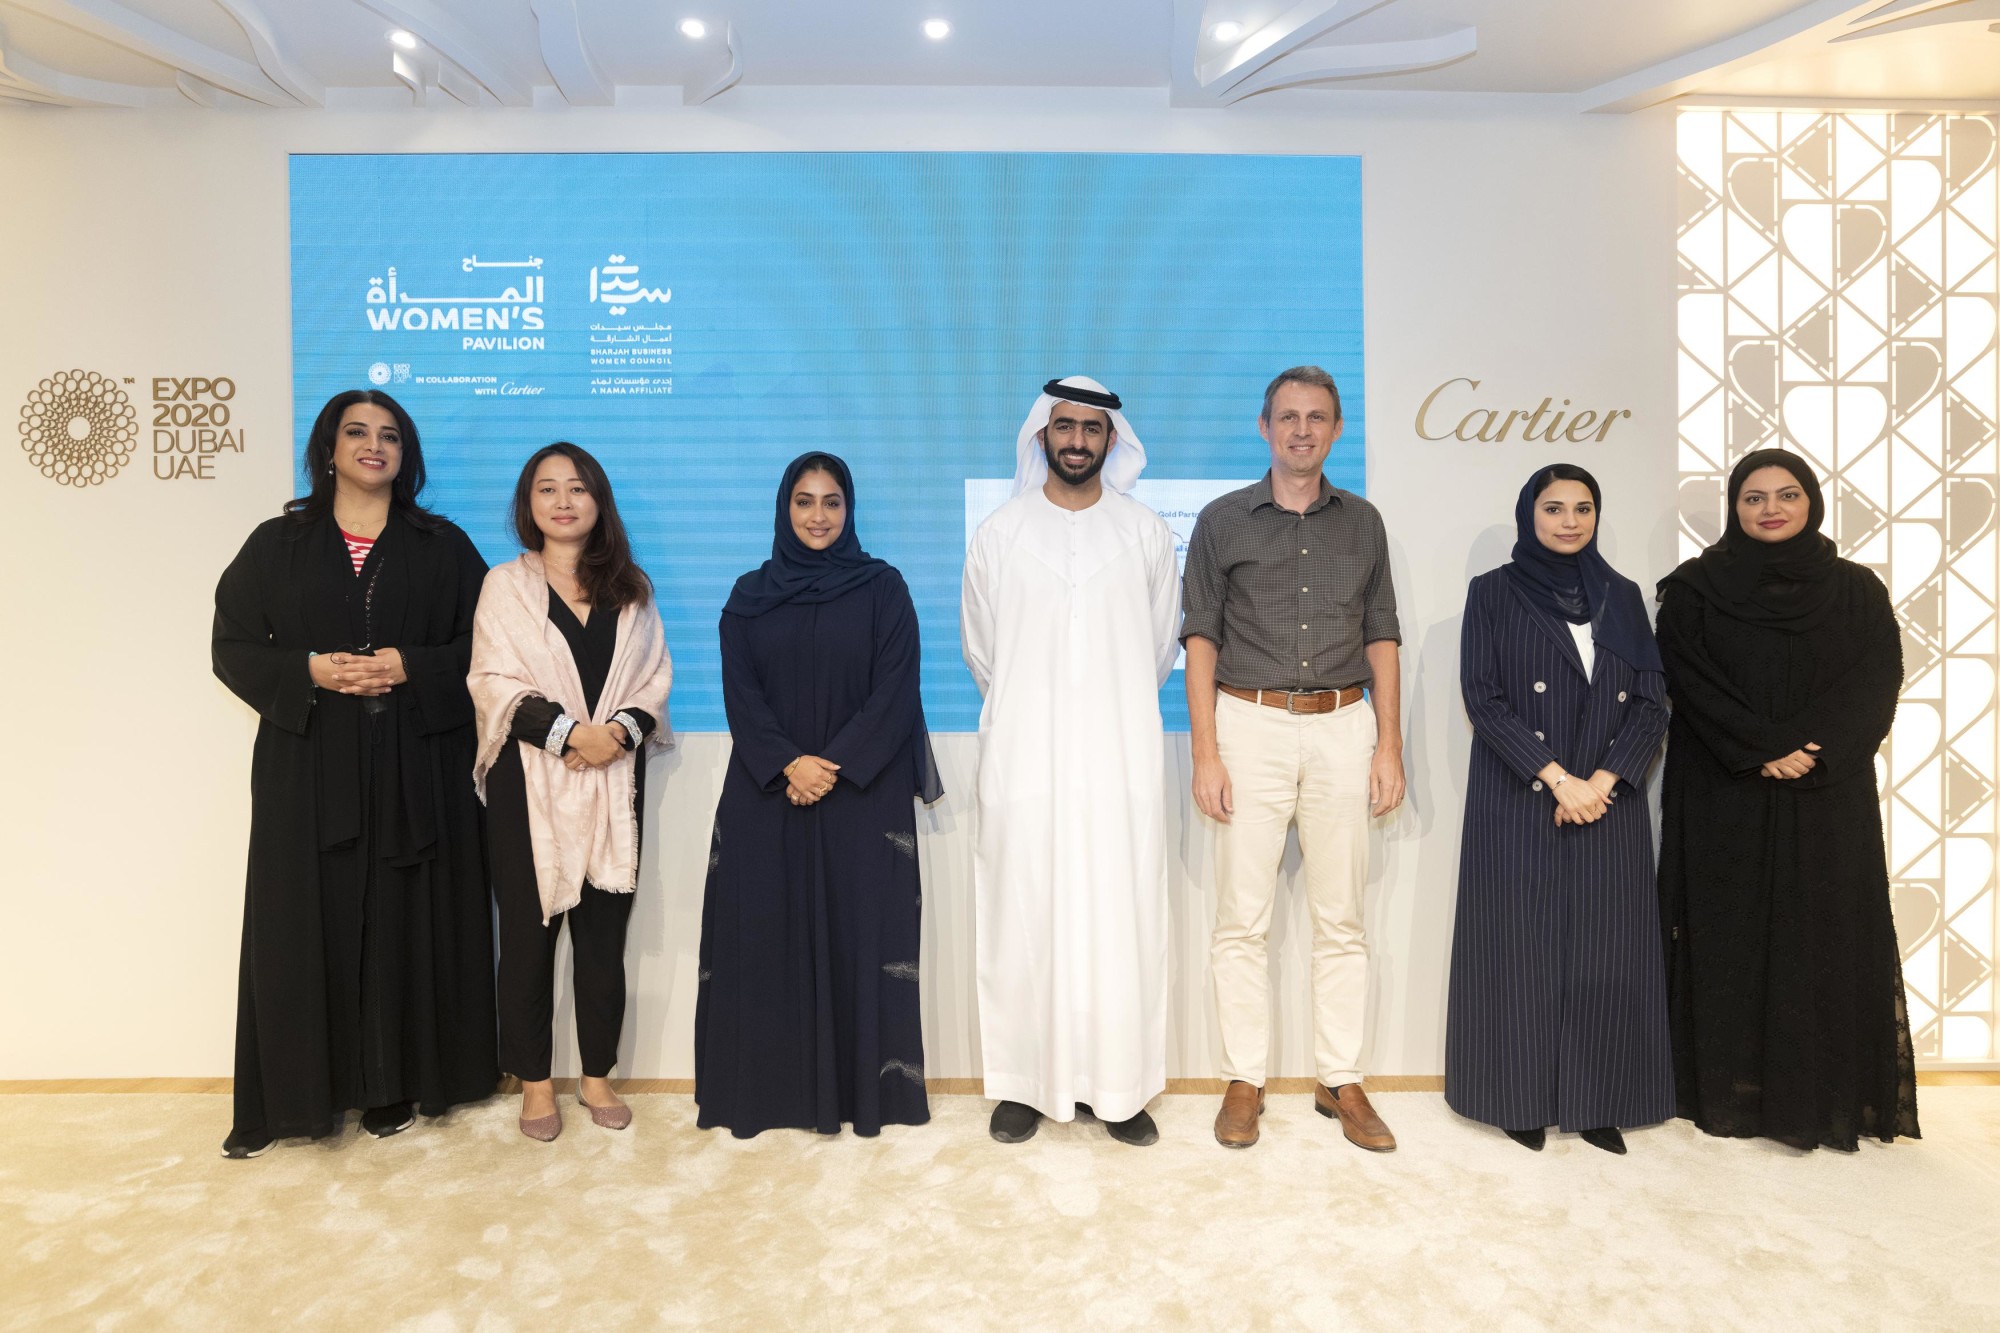 A group photo with Mariam Bin Al Shaikh (L3), Acting Manager of Sharjah Business Women Council, Tao Xiao (L2), Partner at NH Management, Haleema Al Owais (L1), 3rd Gen Real Estate Leader Wealth Management Professional Passionate Educator Mo